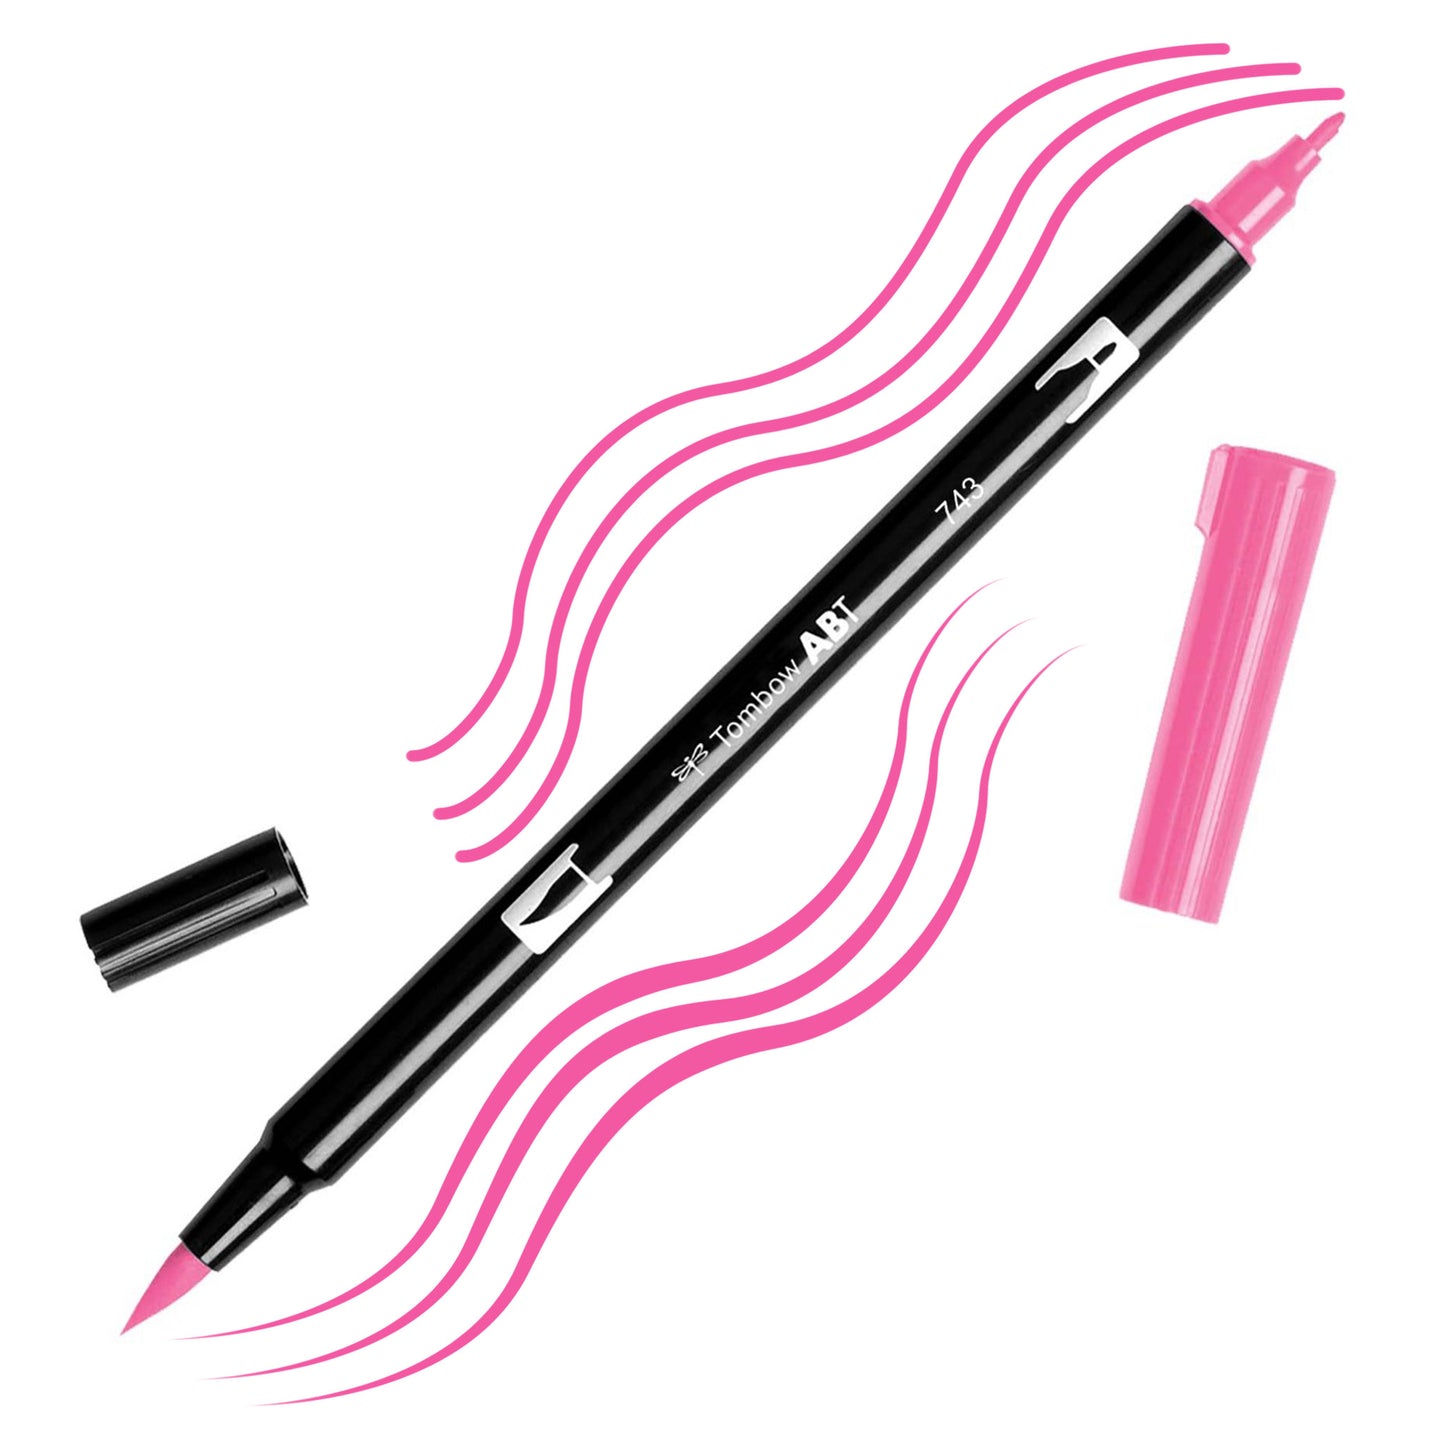 Hot Pink Tombow double-headed brush-pen with a flexible nylon fiber brush tip and a fine tip against a white background with Hot Pink strokes